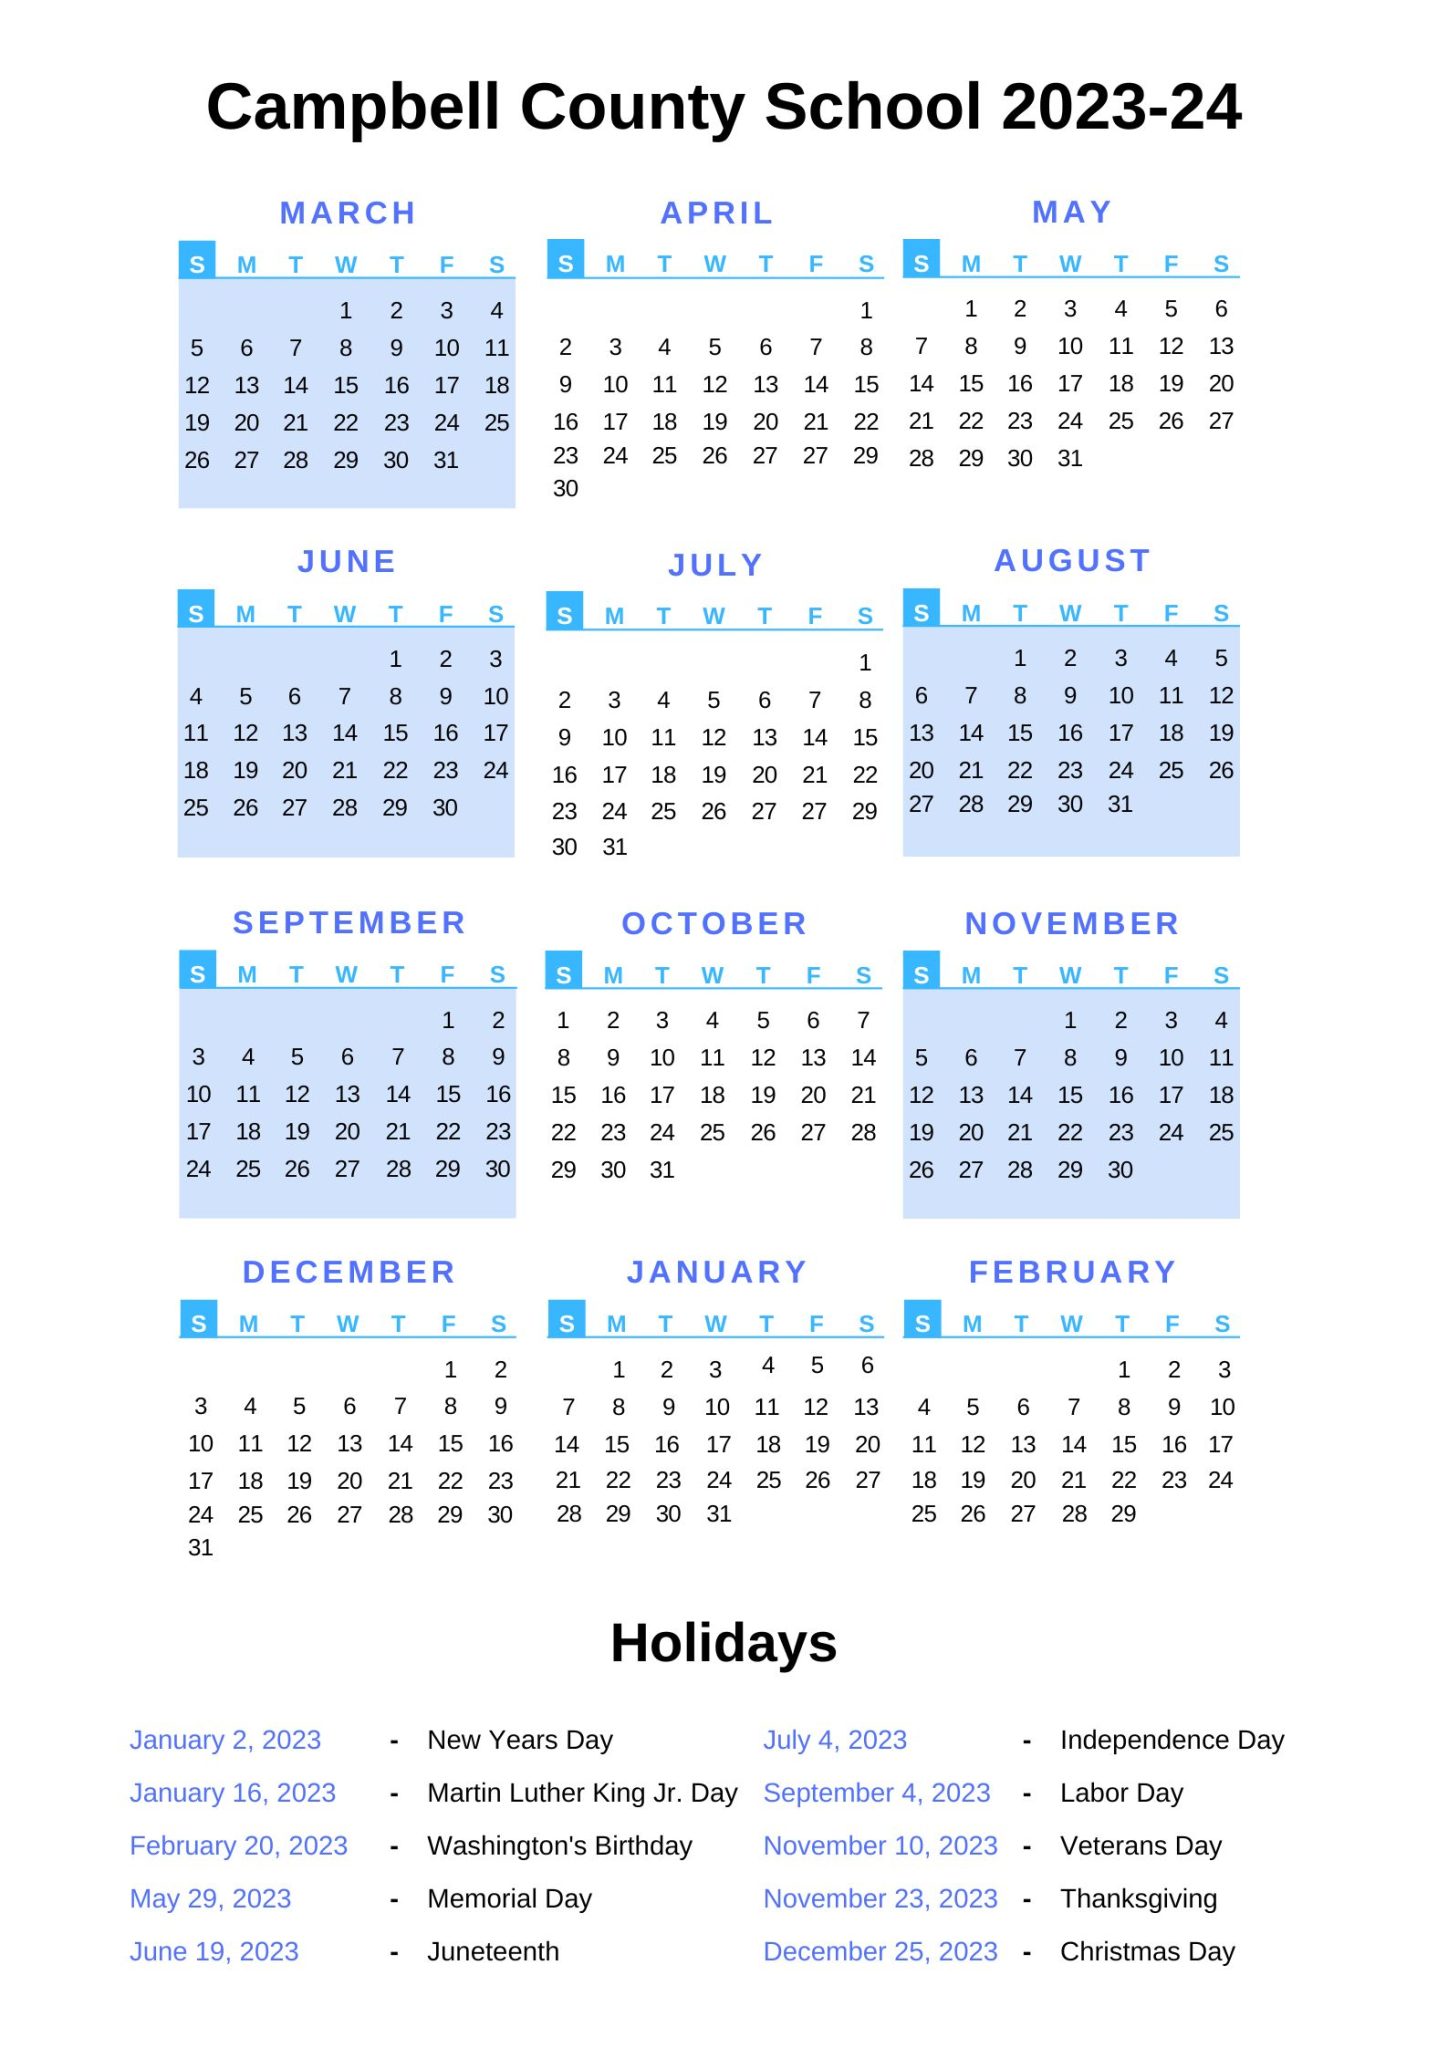 campbell-county-schools-calendar-2023-24-with-holidays